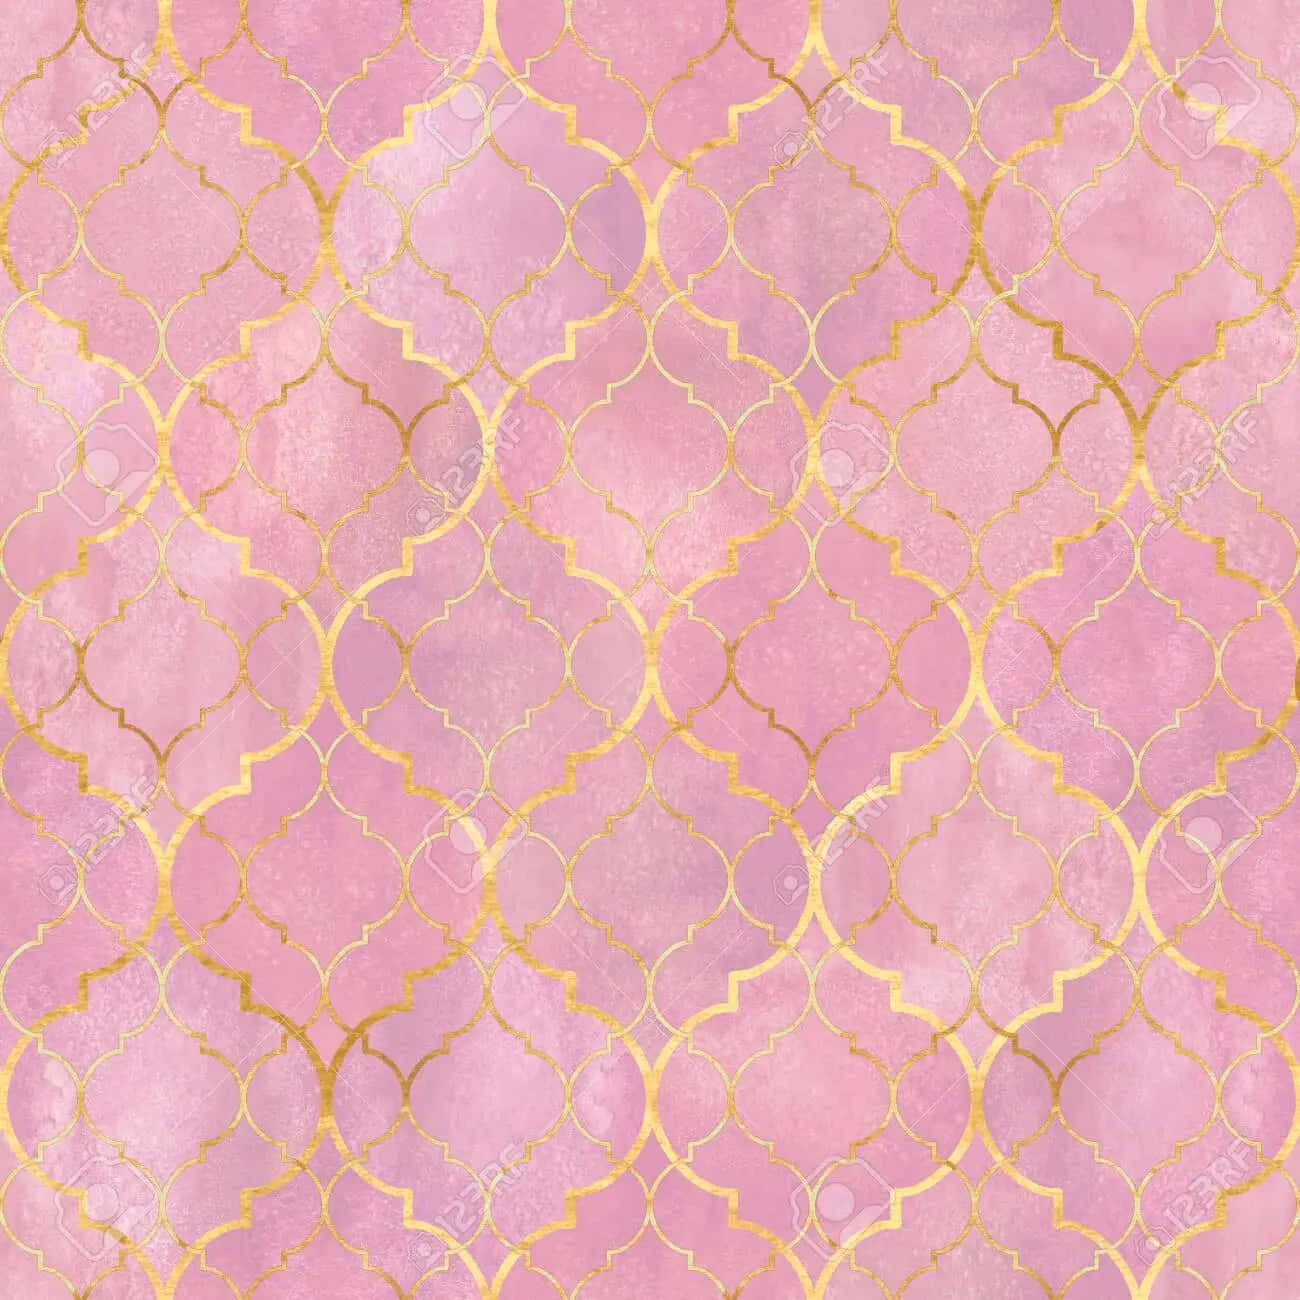 Features a Light Pink and Gold Theme Wallpaper